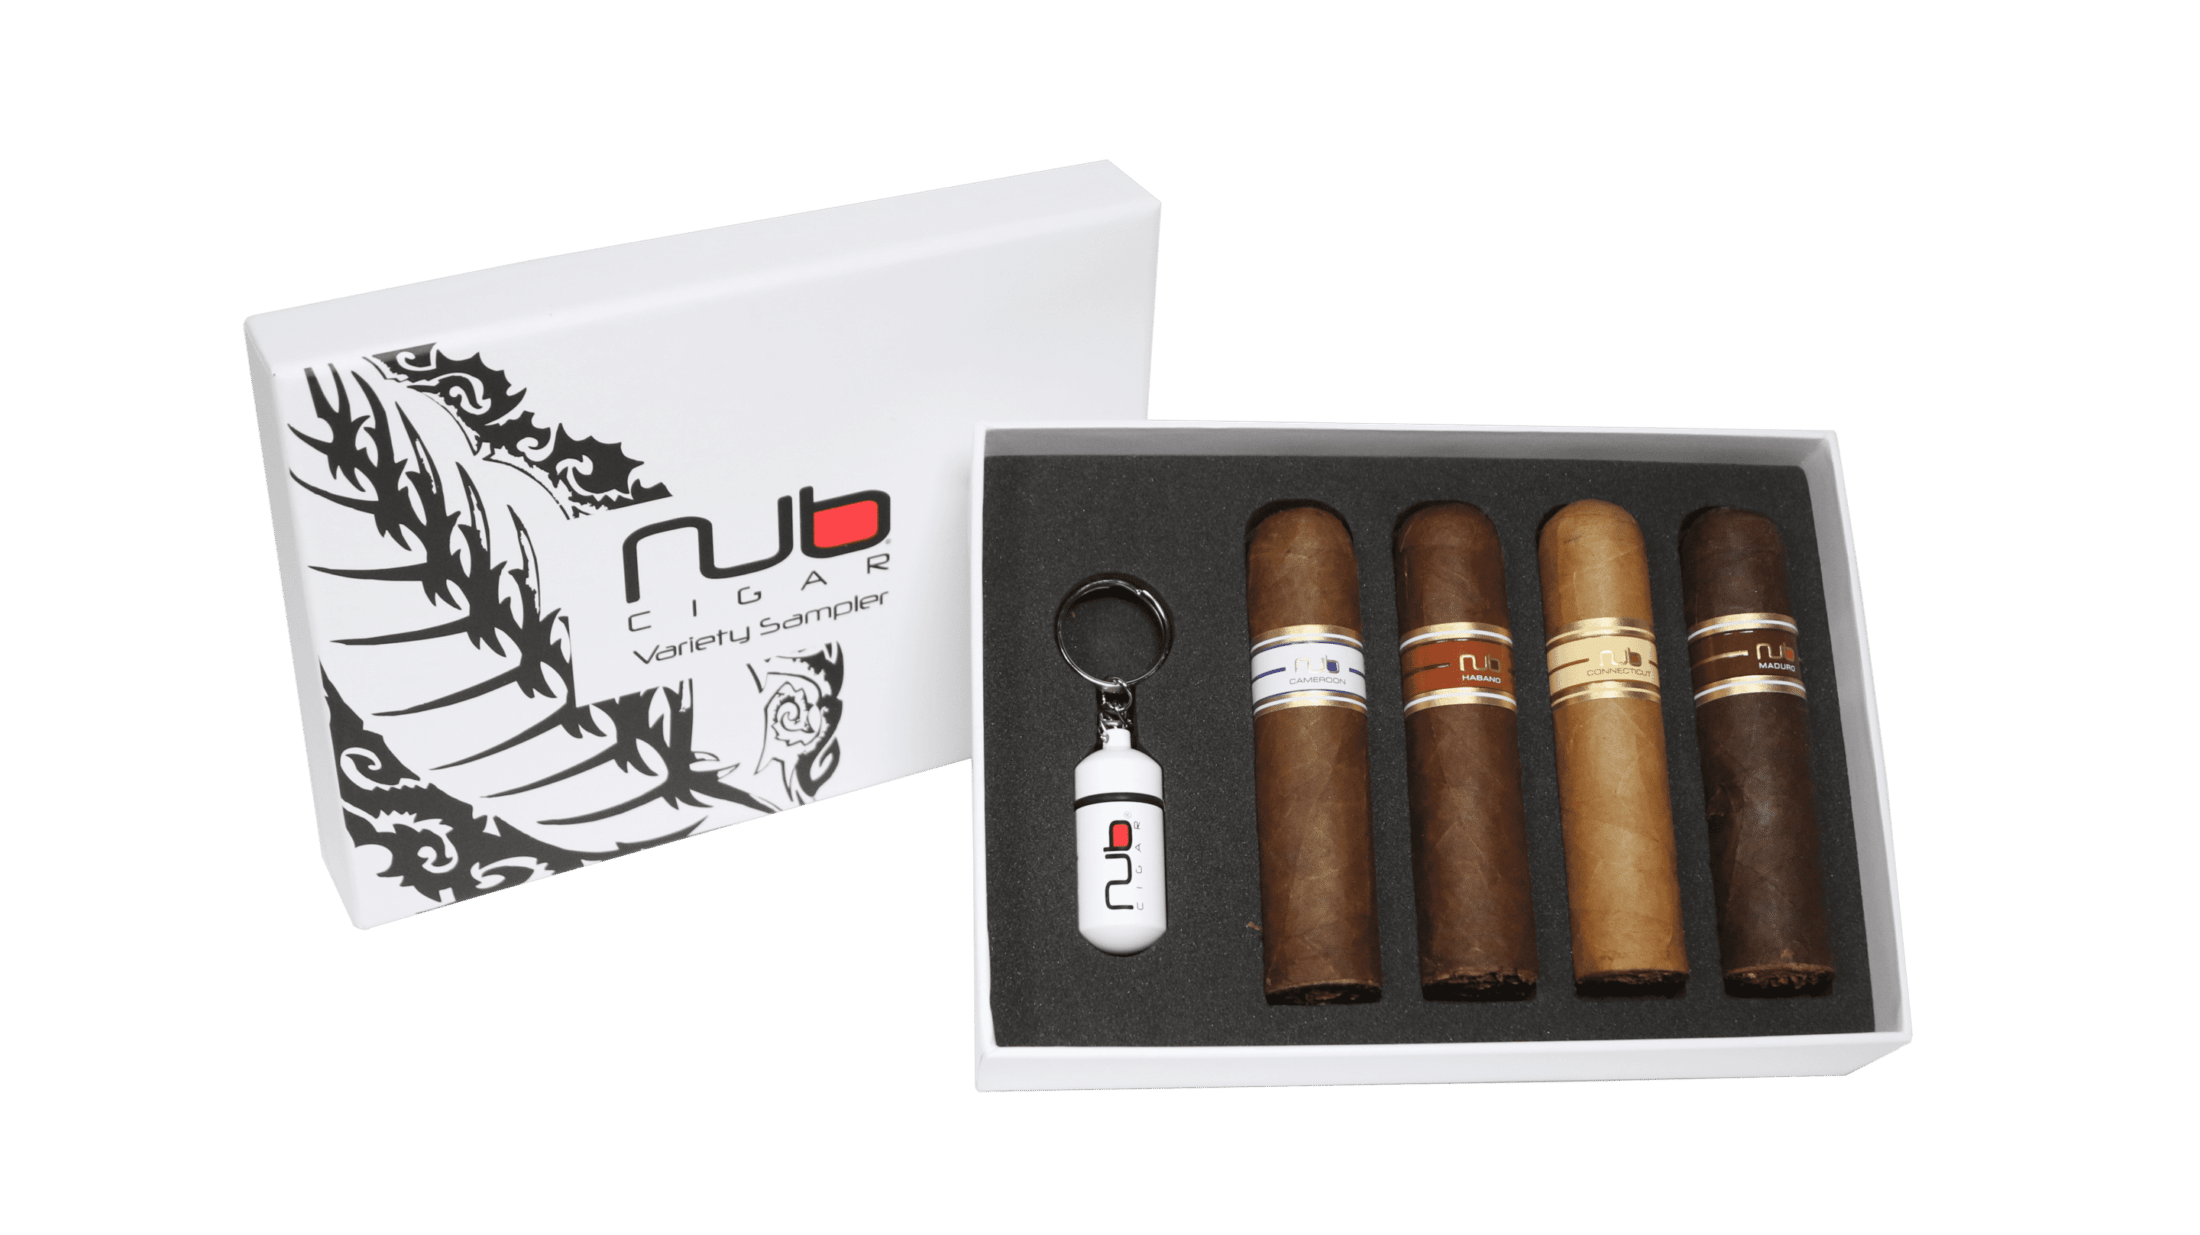 4 count Nub Cigar Variety Sampler with Punch cutter